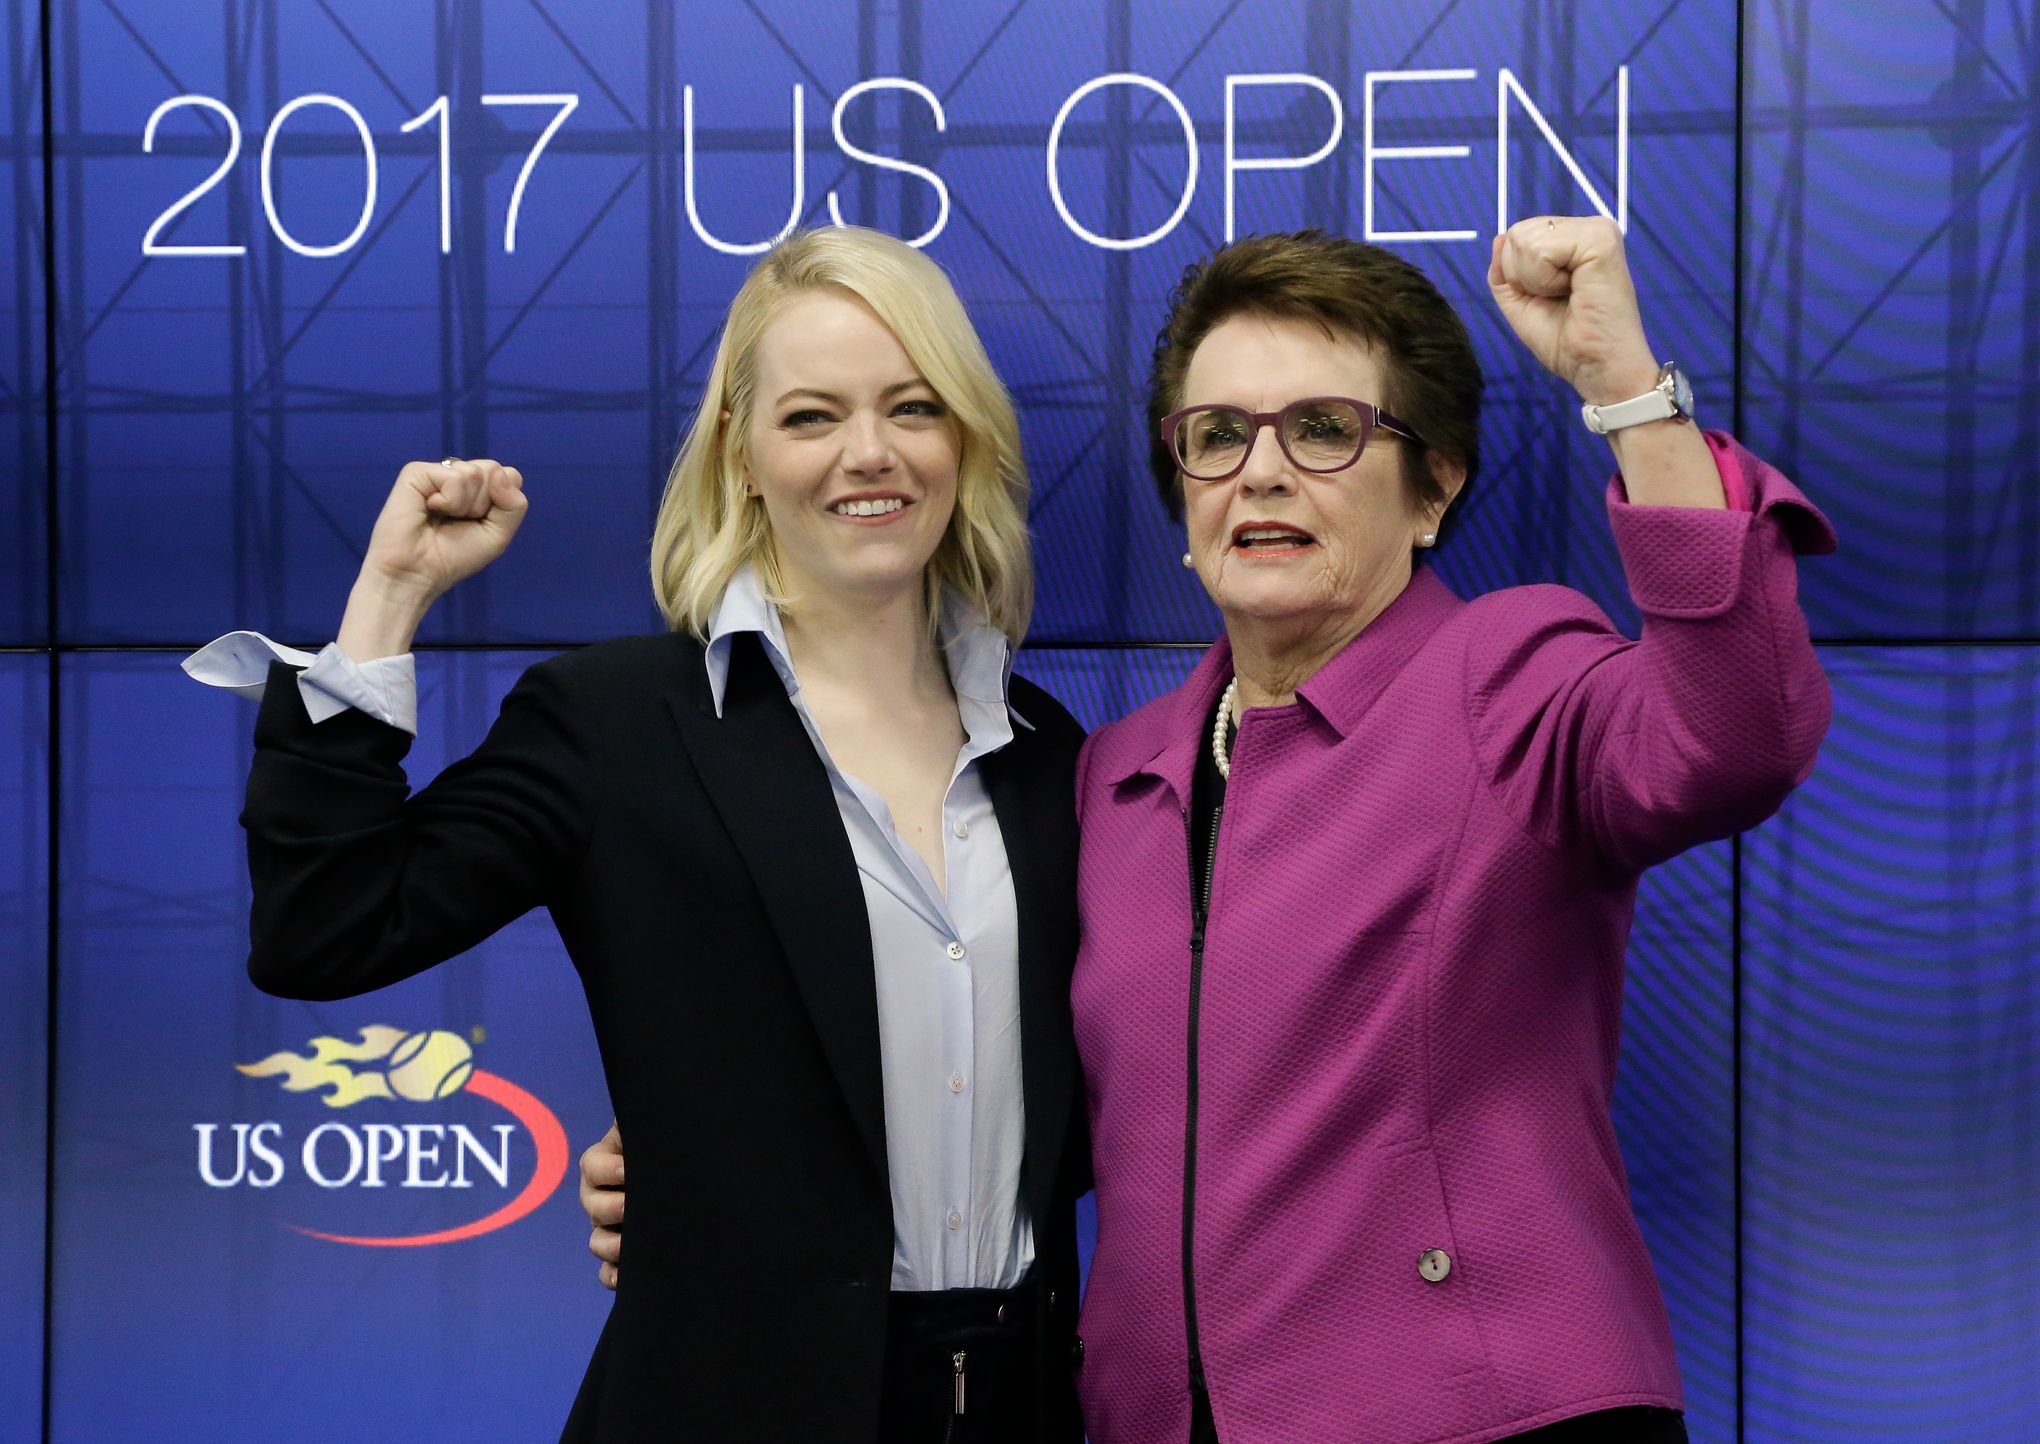 She Played Billie Jean King in a Movie. Now She's Focusing on Her